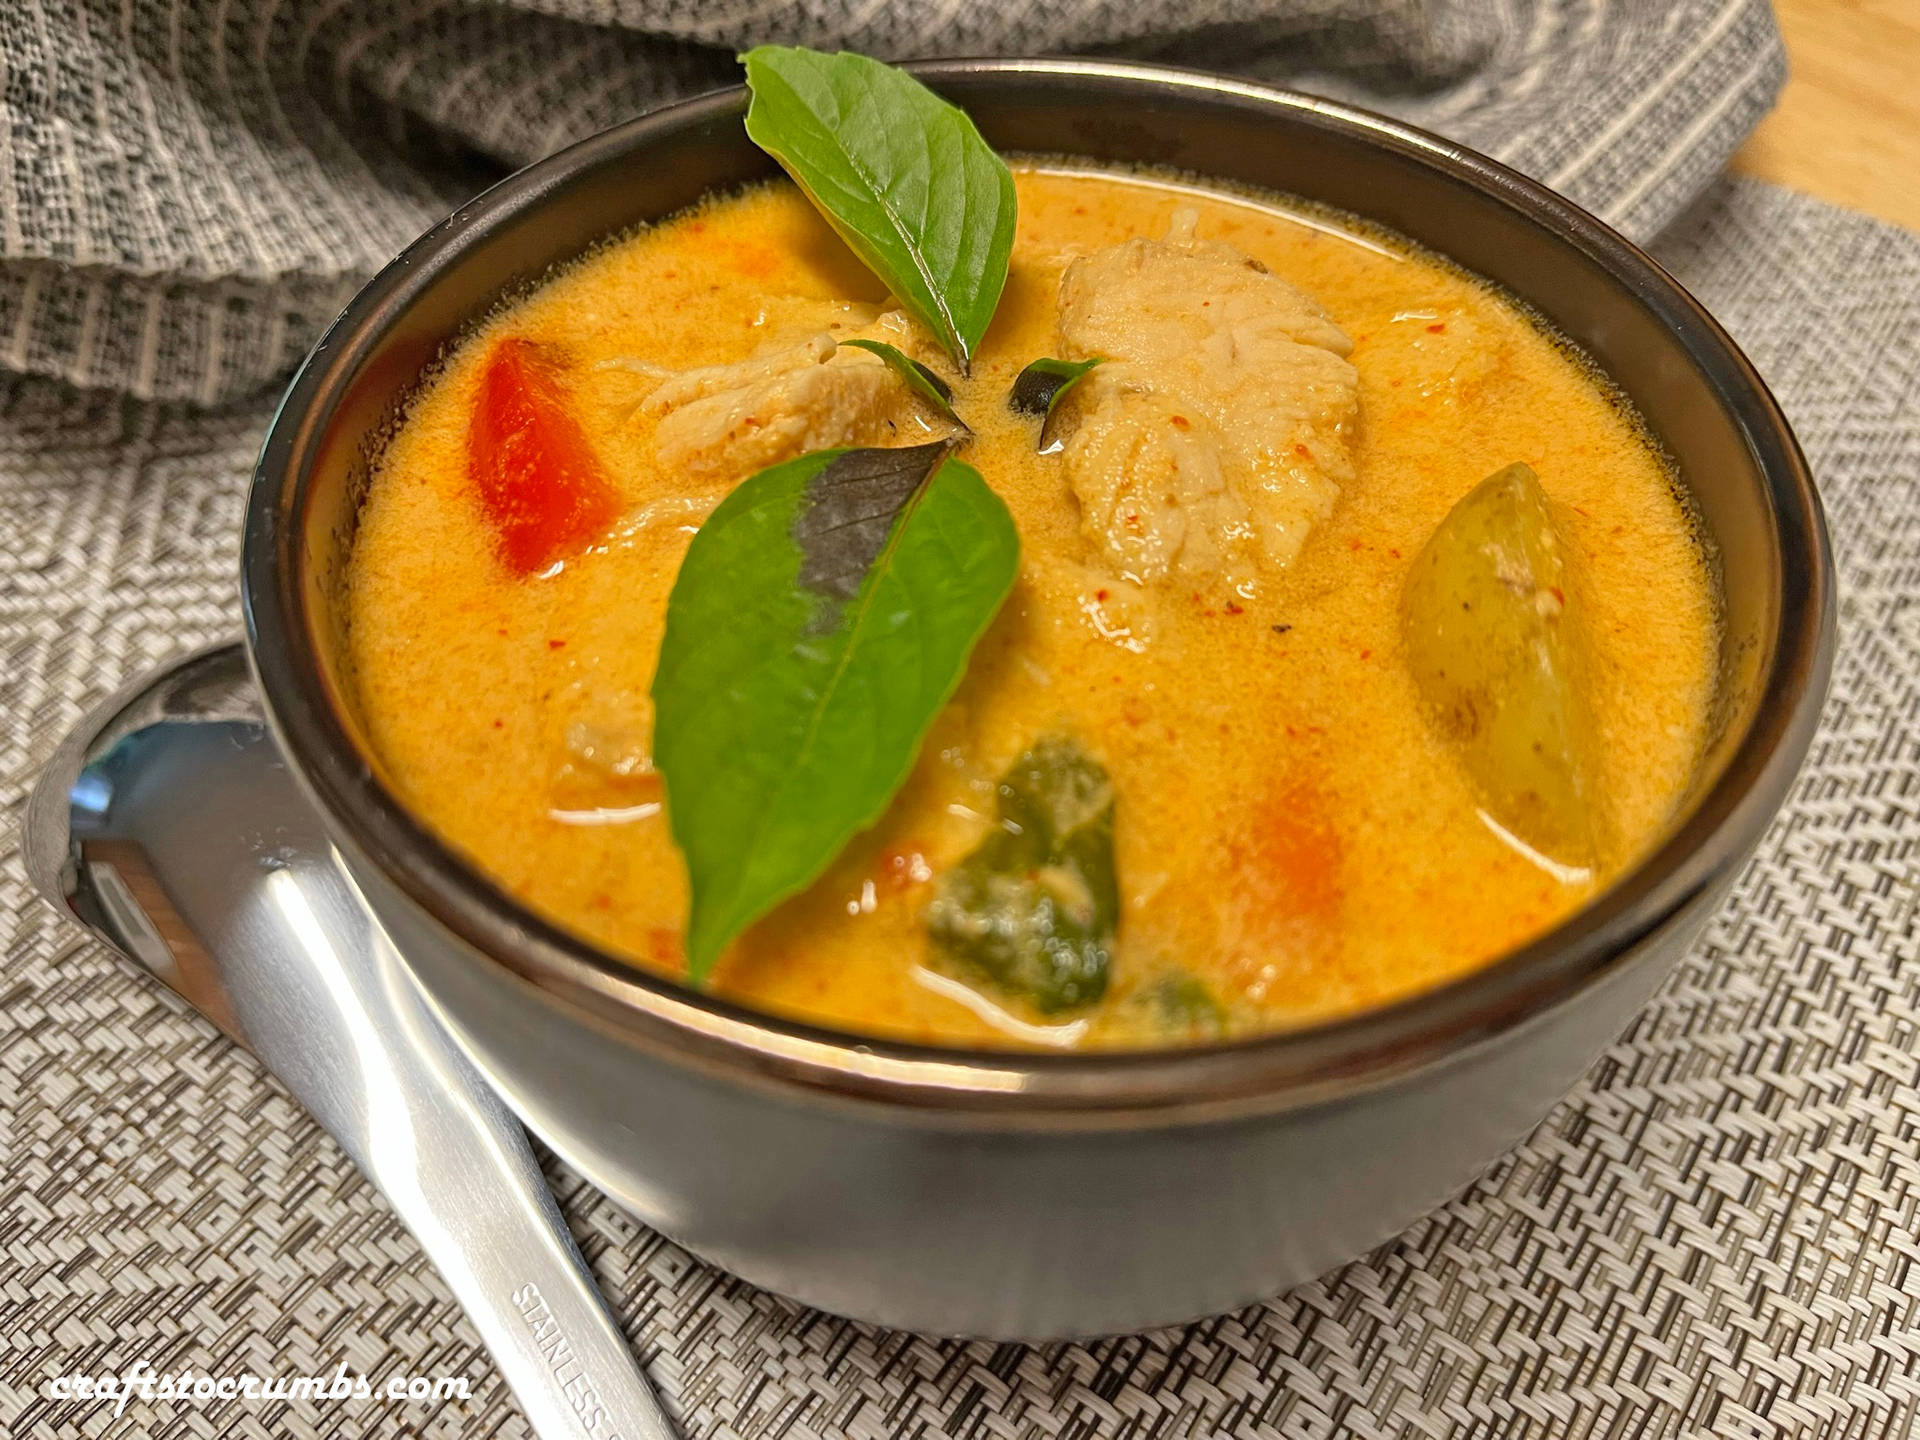 An inviting bowl of Gaeng Phet- Red Thai Curry Wallpaper